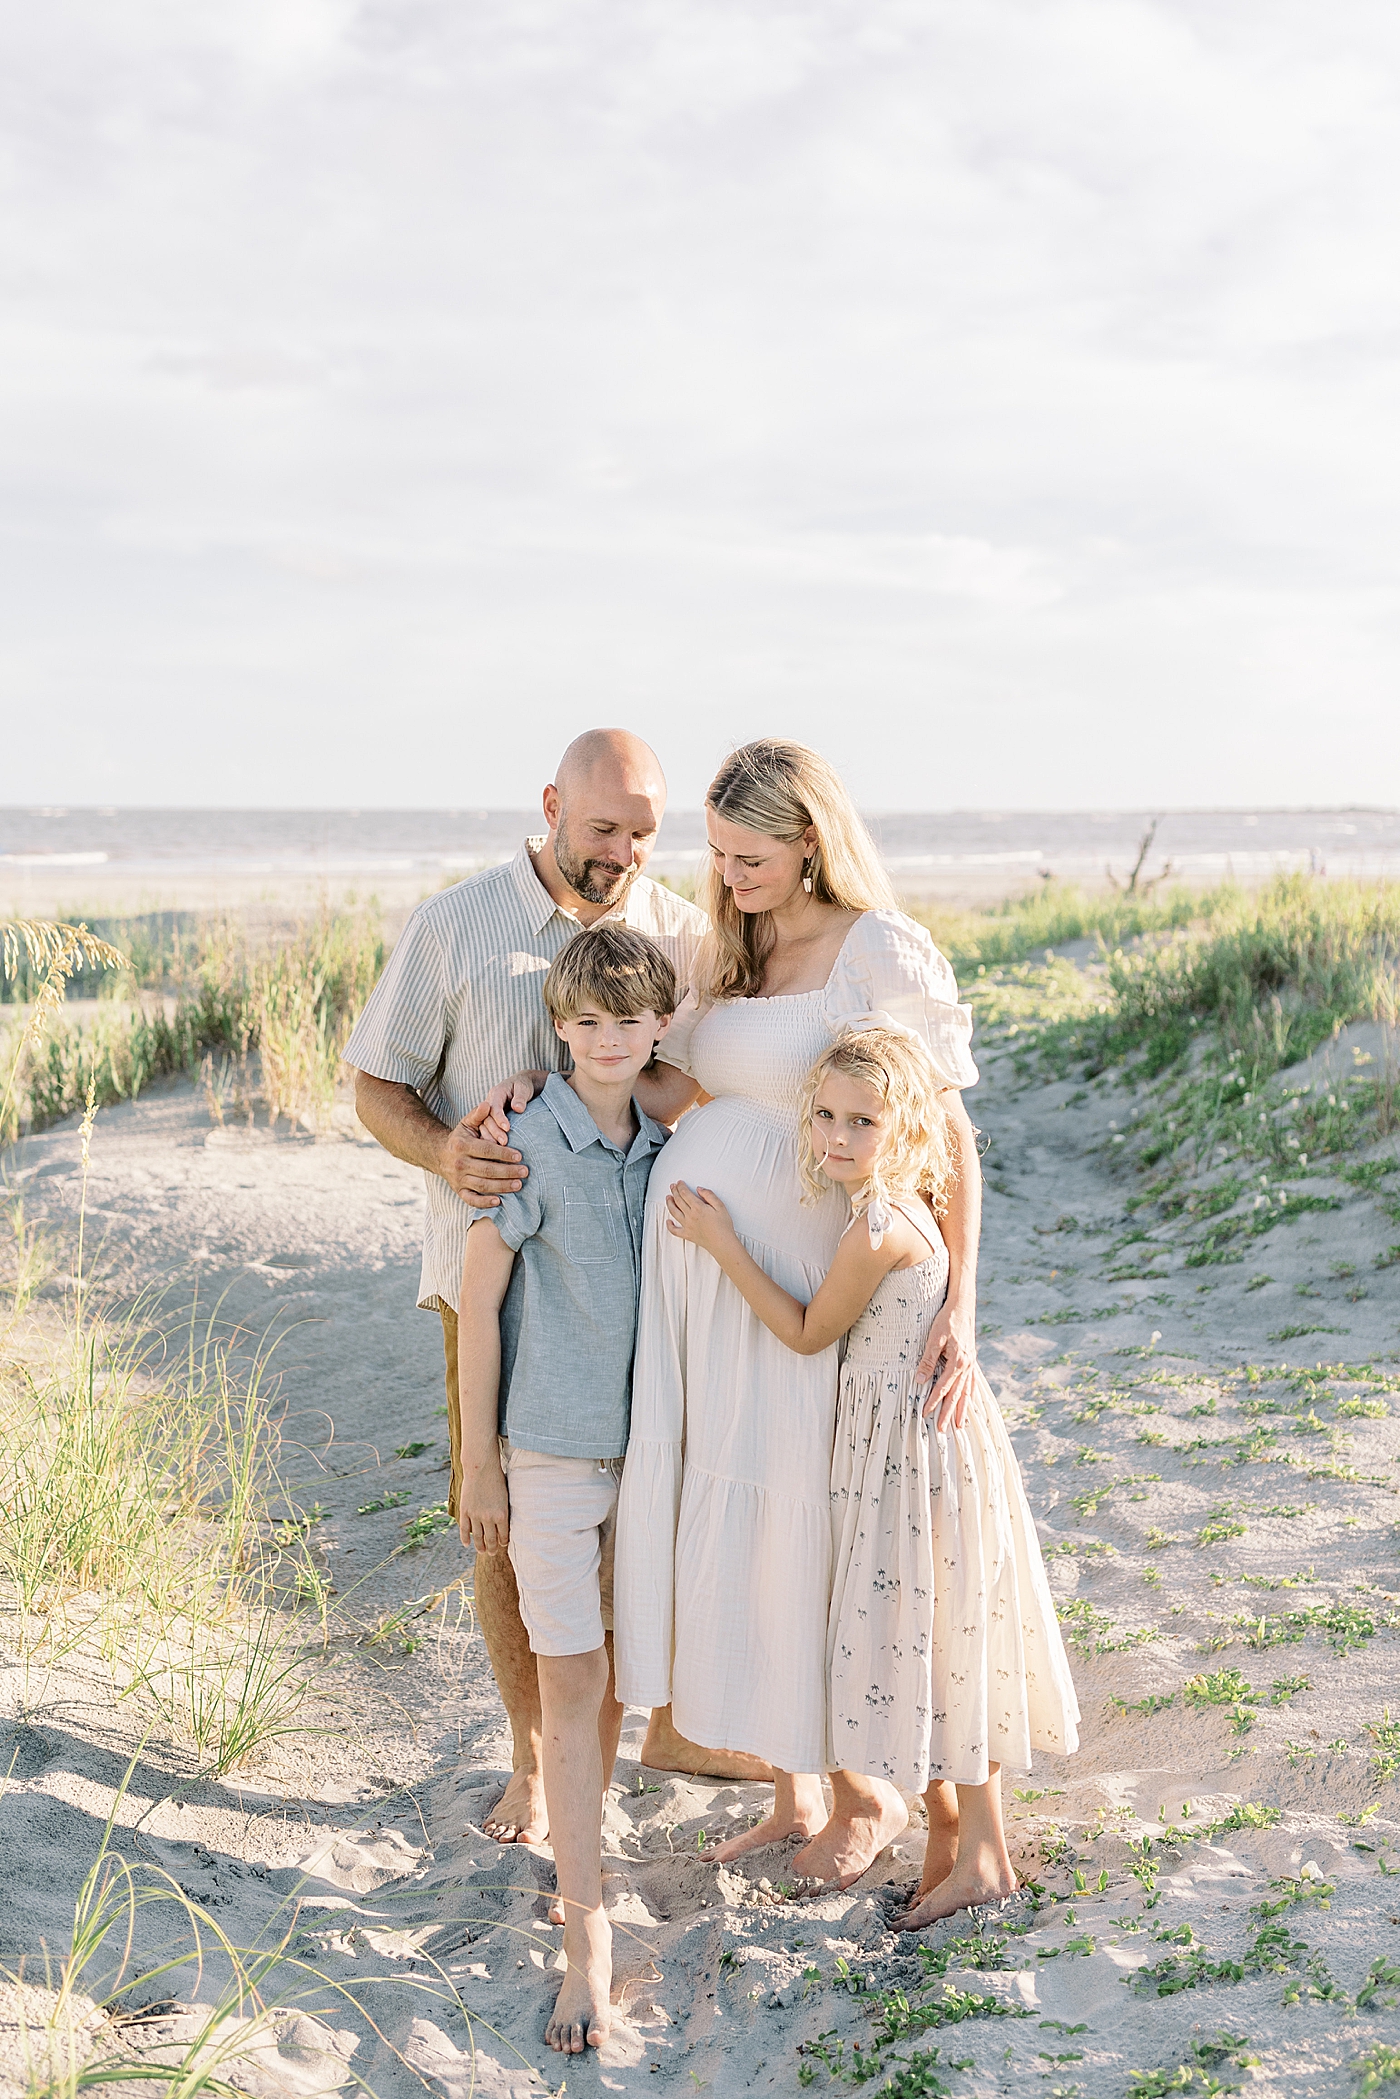 Family of four snuggling at the beach | Image by Caitlyn Motycka